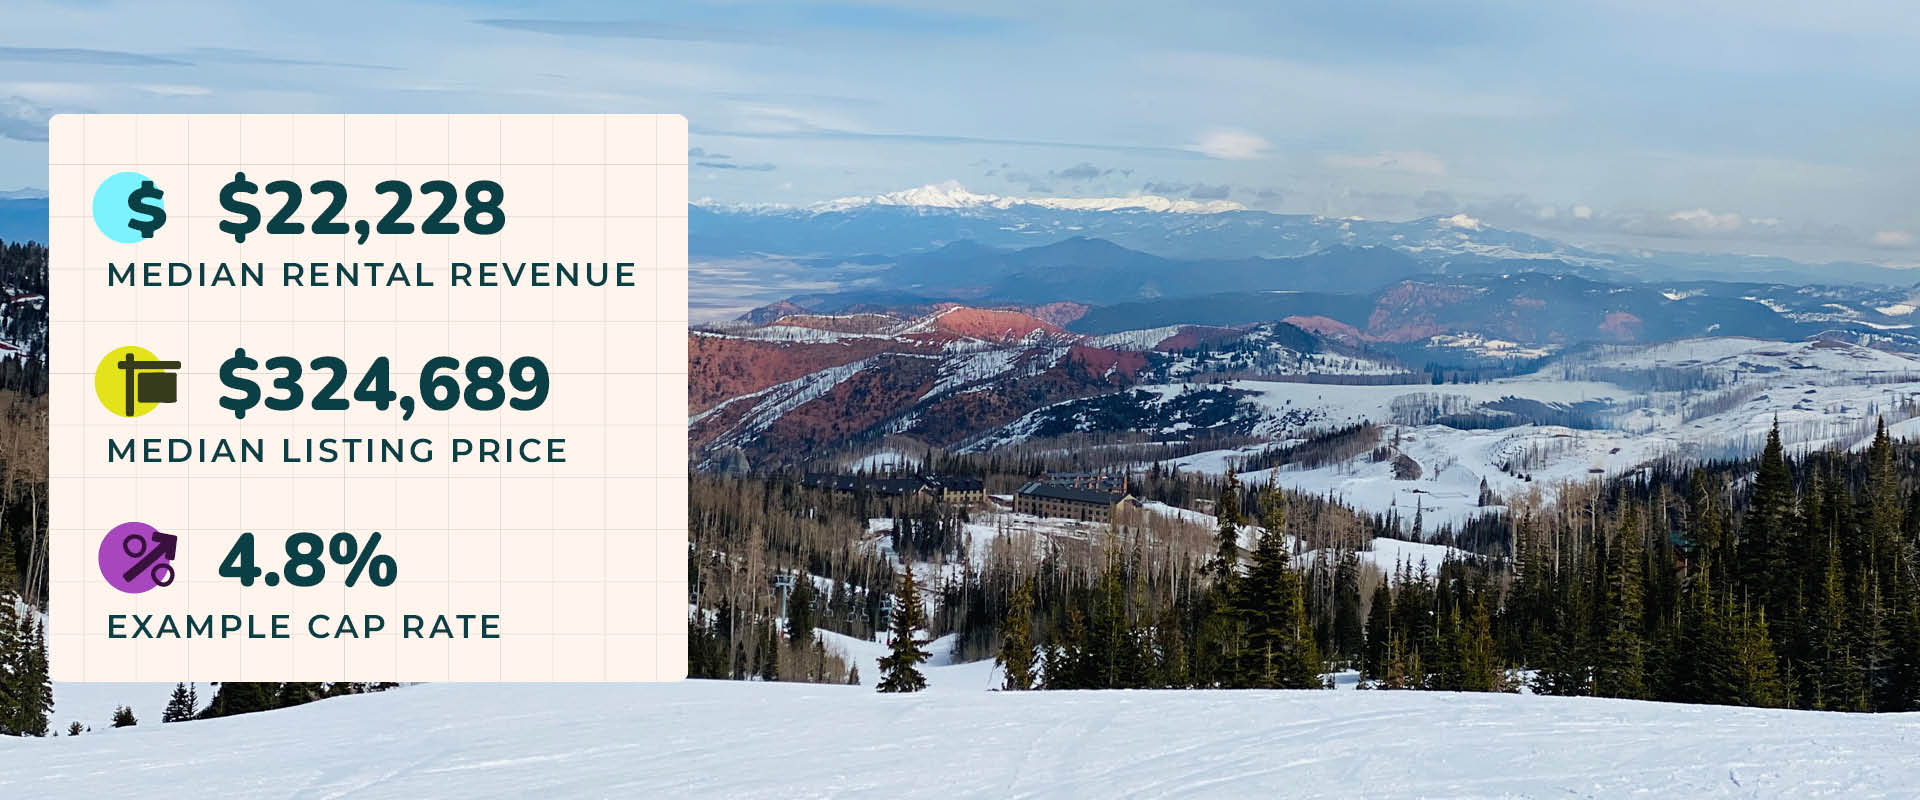 Photo from the top of a trail looking down at a ski resort in Brian Head, Utah covered in snow. Image text reads, "$22,228 median rental revenue. $324,689 median listing price. 4.8% example cap rate."